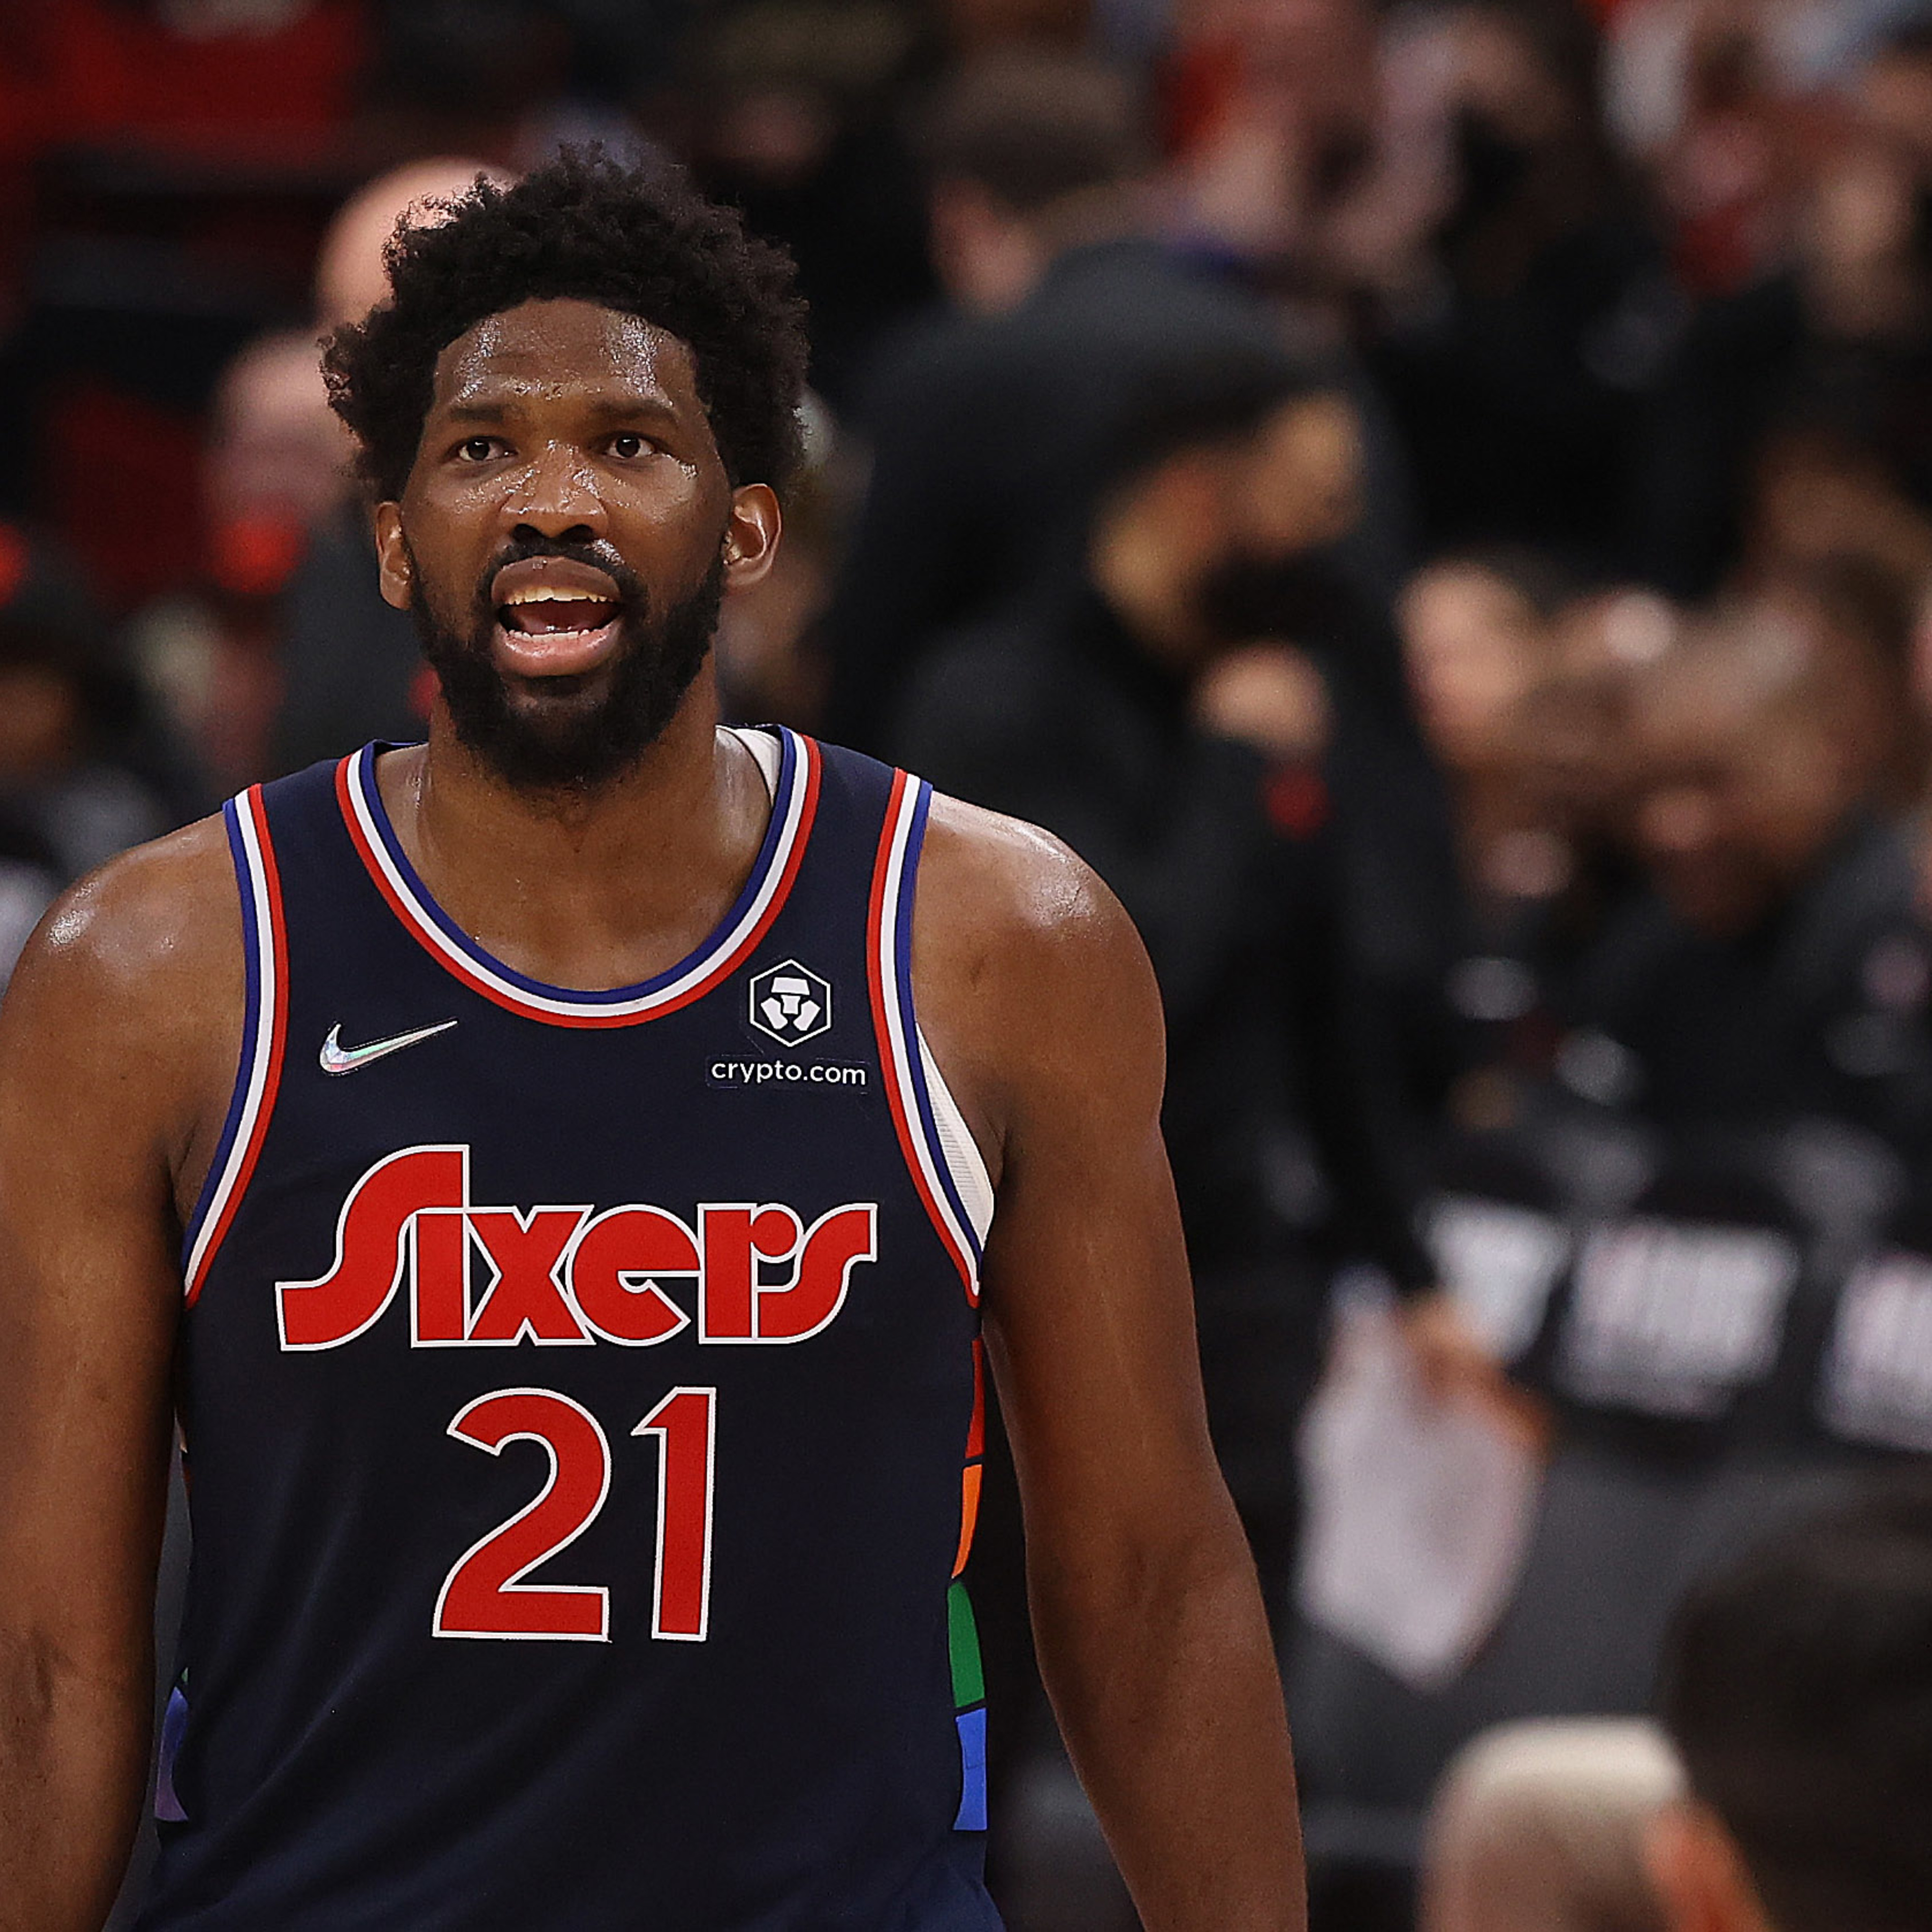 Woj: 76ers' Joel Embiid Returning for Game 3 vs. Heat After Injury Recovery